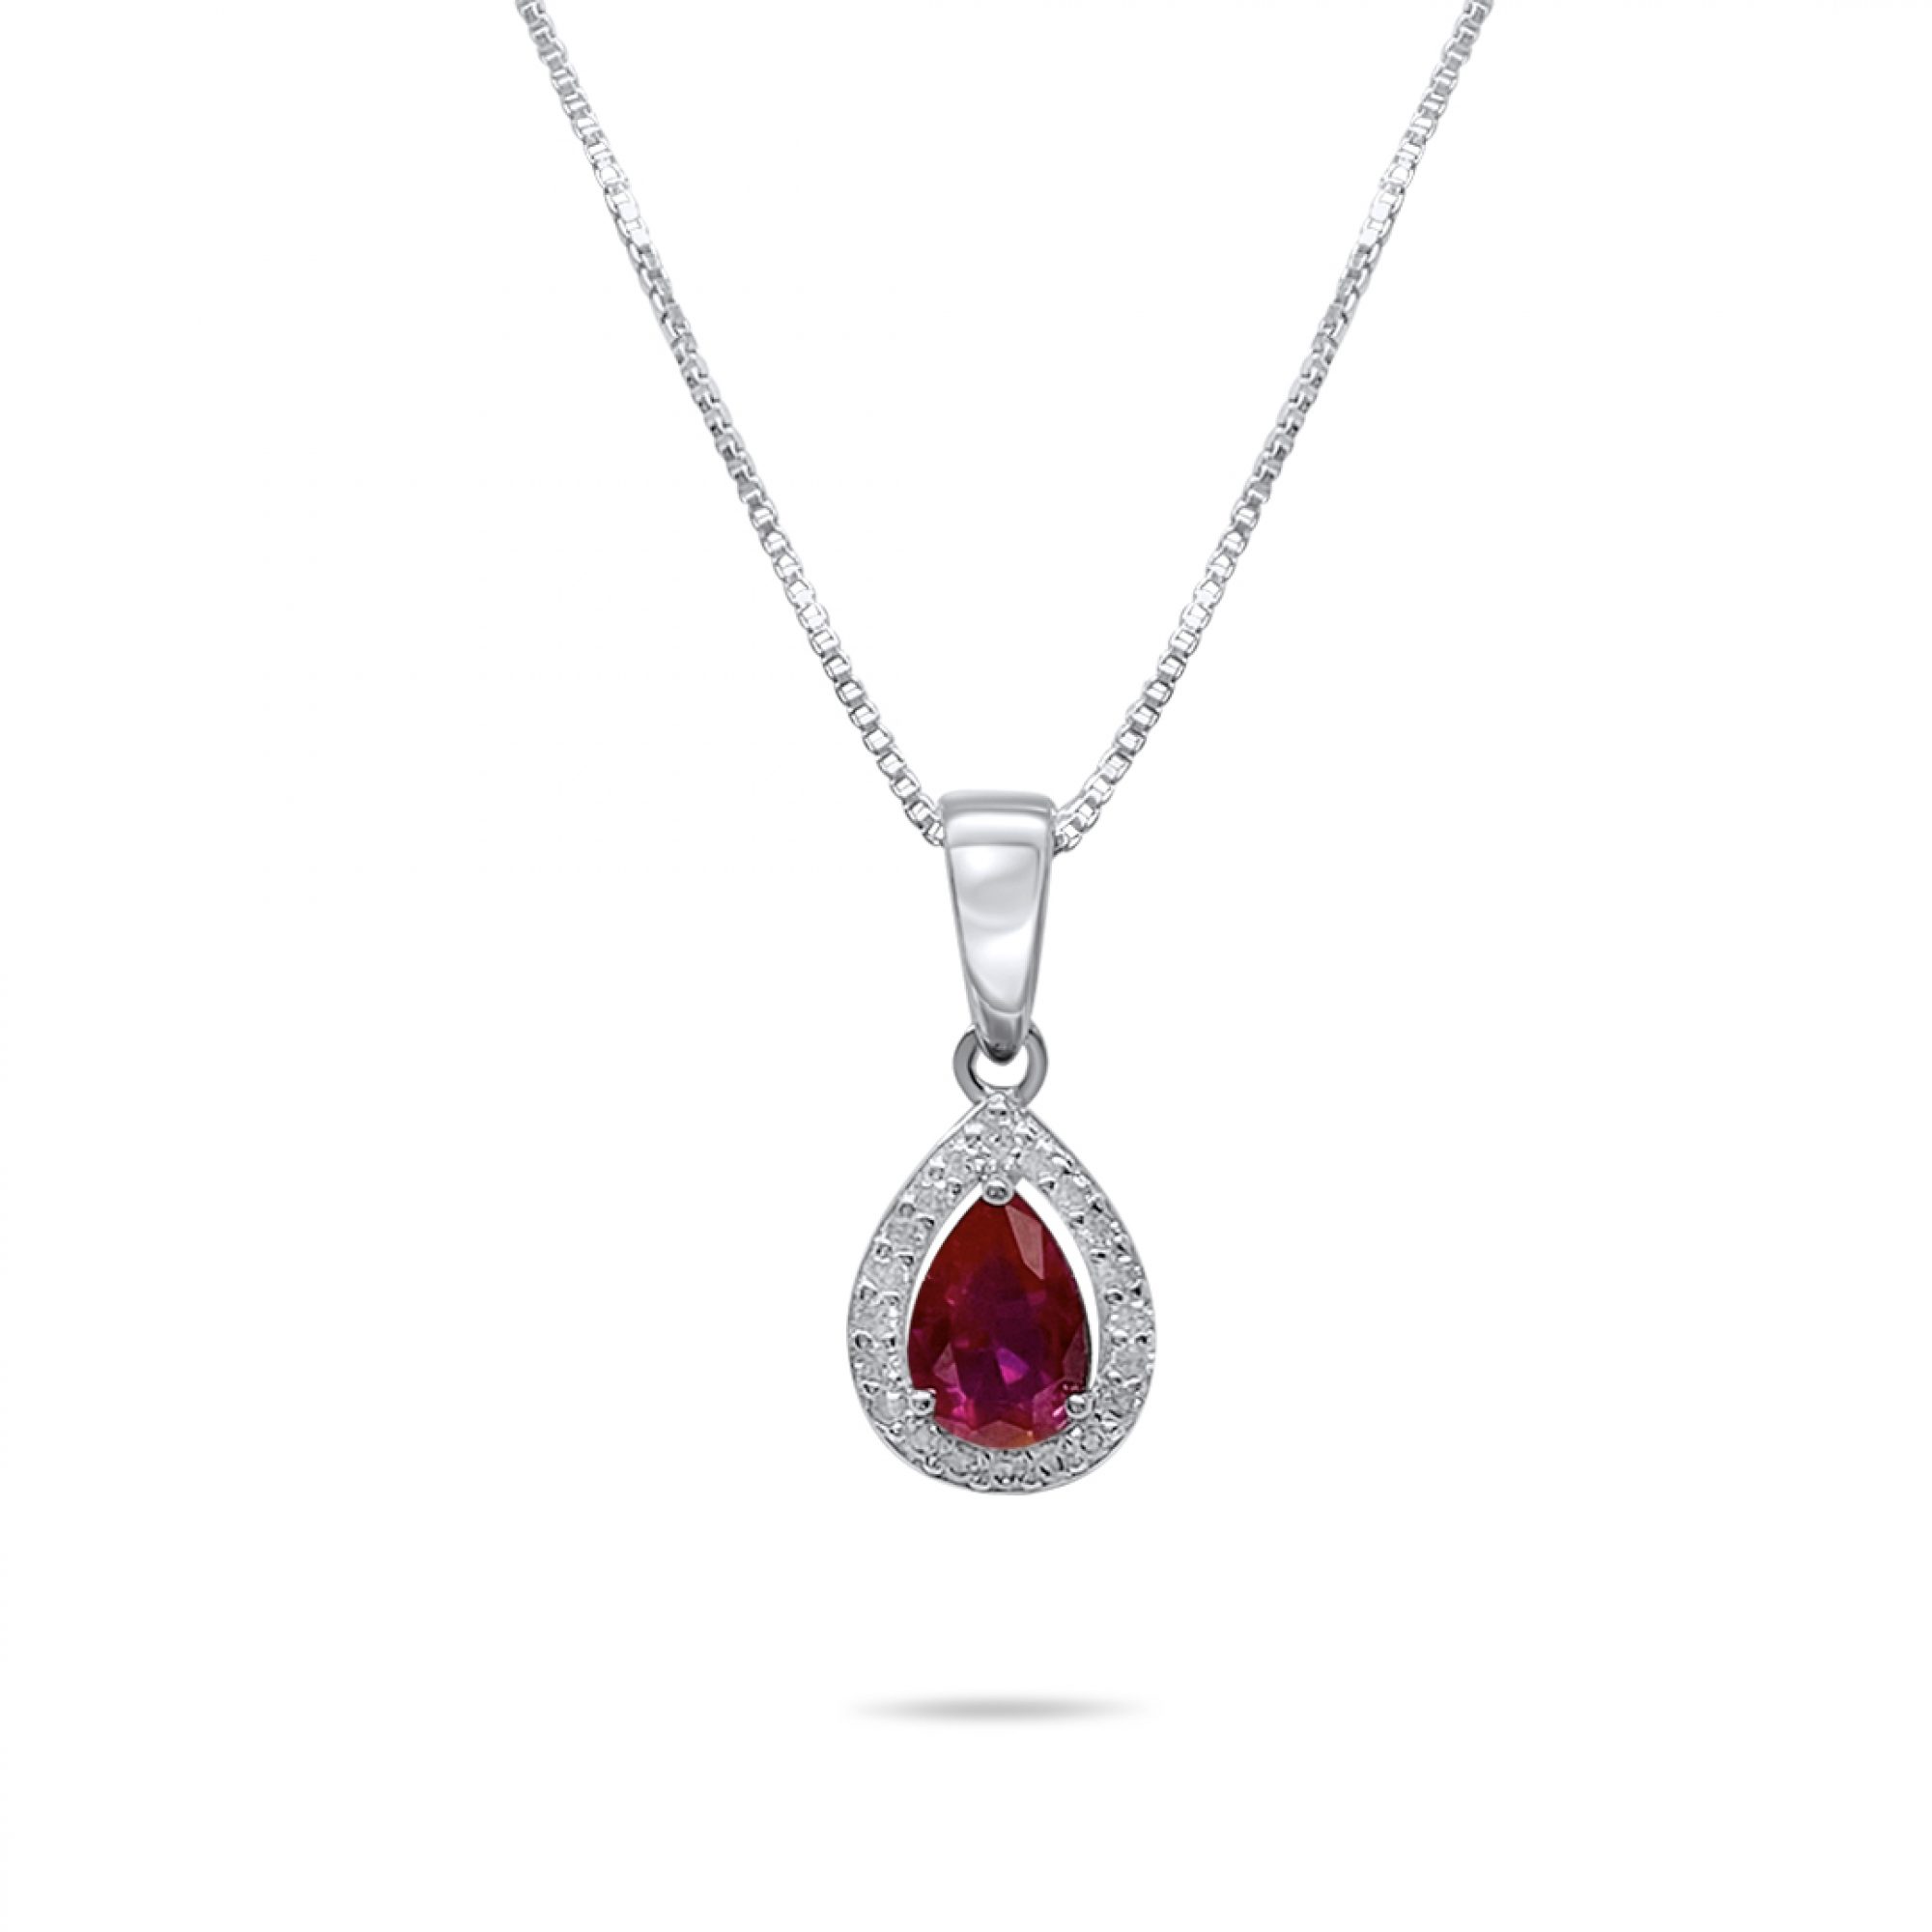 Necklace with ruby and zircon stones